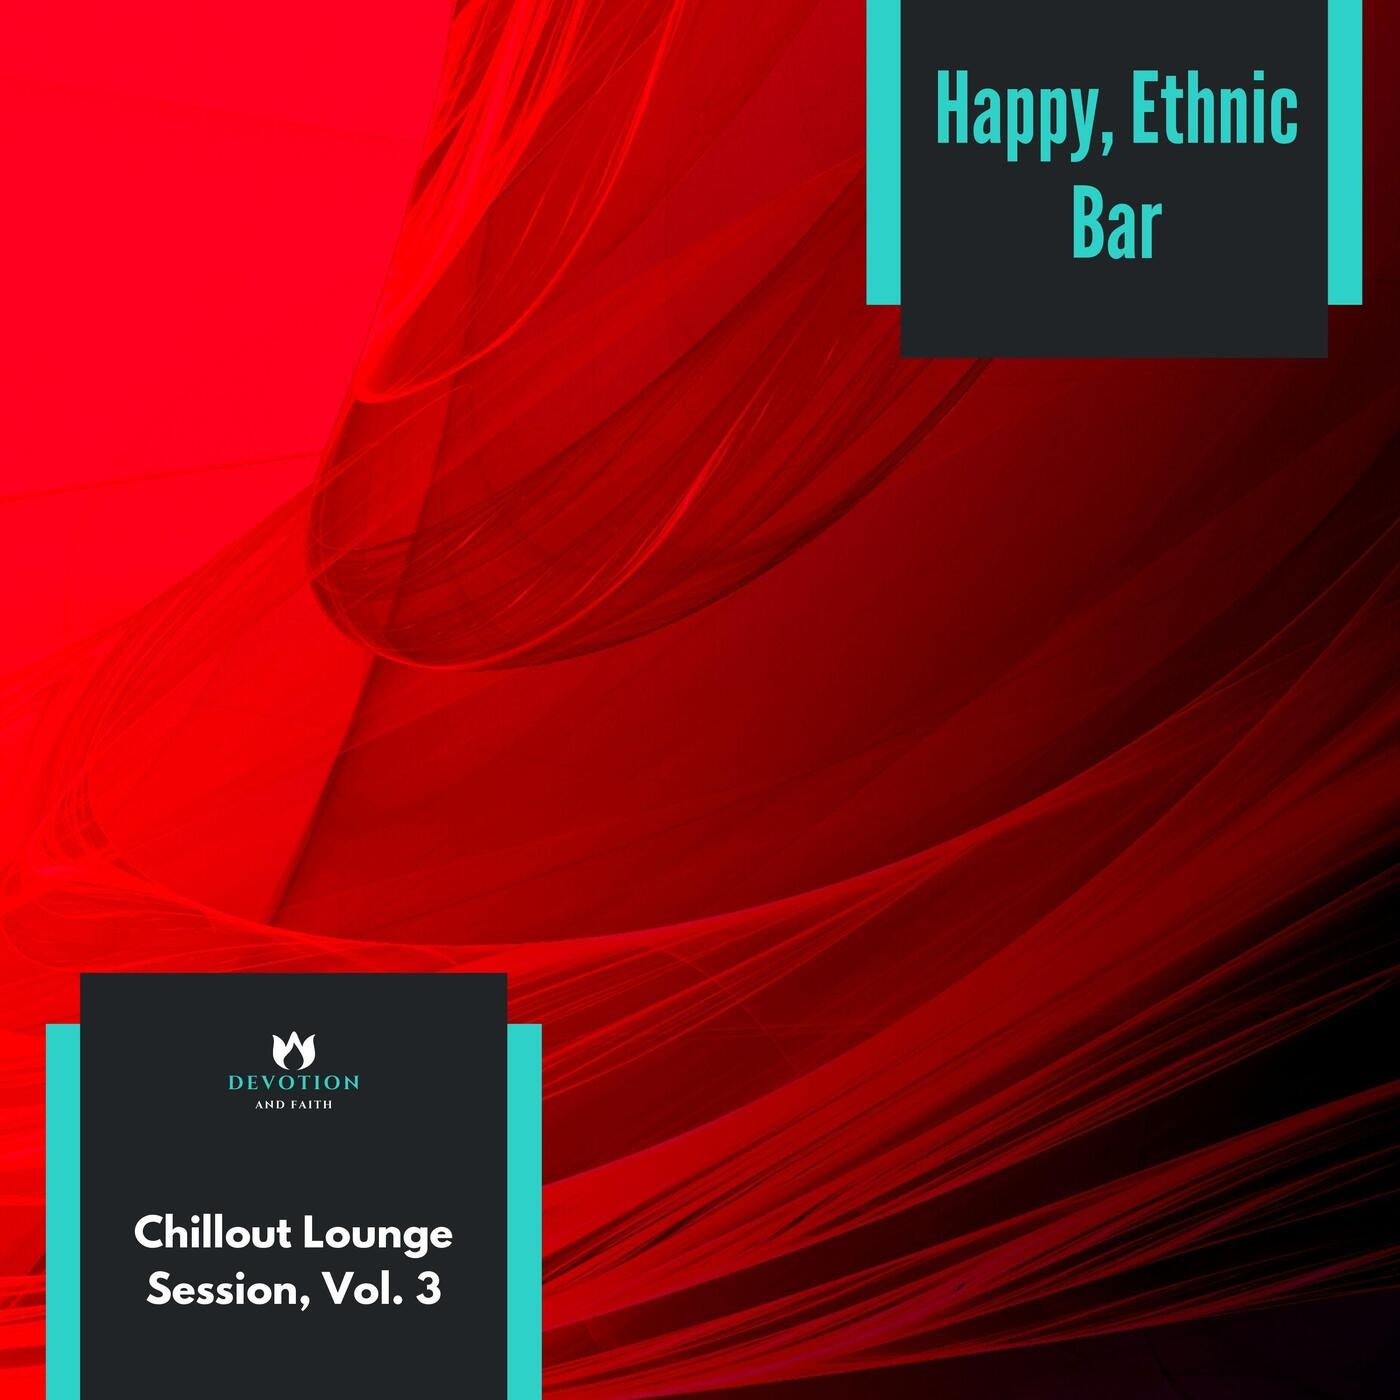 Happy, Ethnic Bar - Chillout Lounge Session, Vol. 3